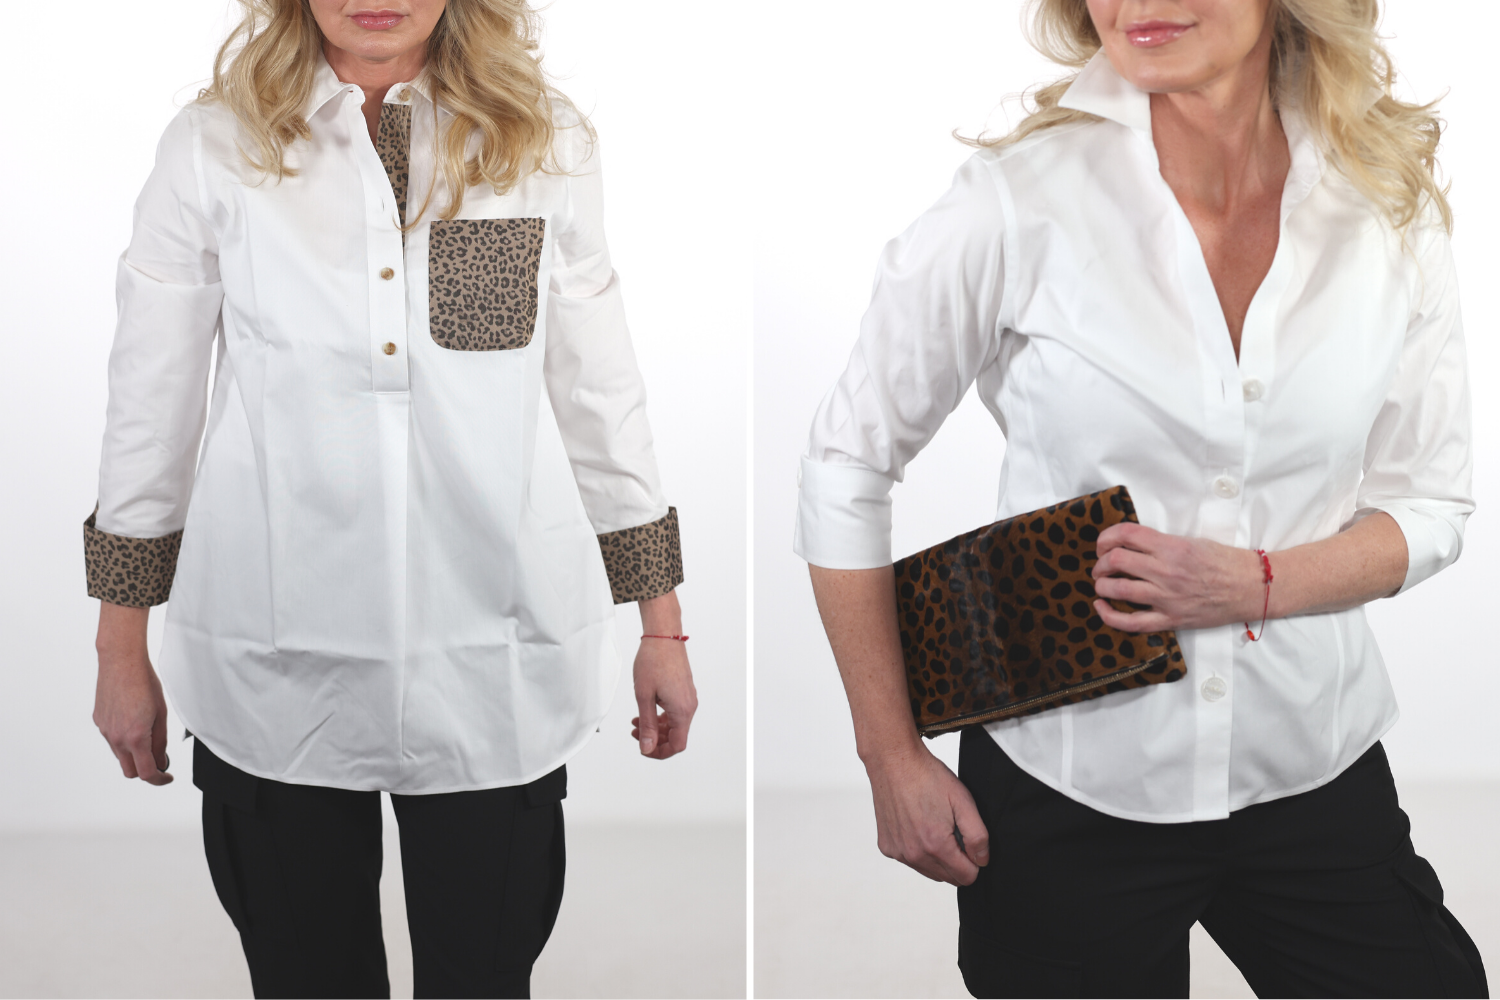 How To Look Younger, Erin Busbee of Busbee in a before and after wearing a white tunic top with leopard print details on the pocket and cuffs on the left and a white button down and leaopard clutch by Clare V on the right